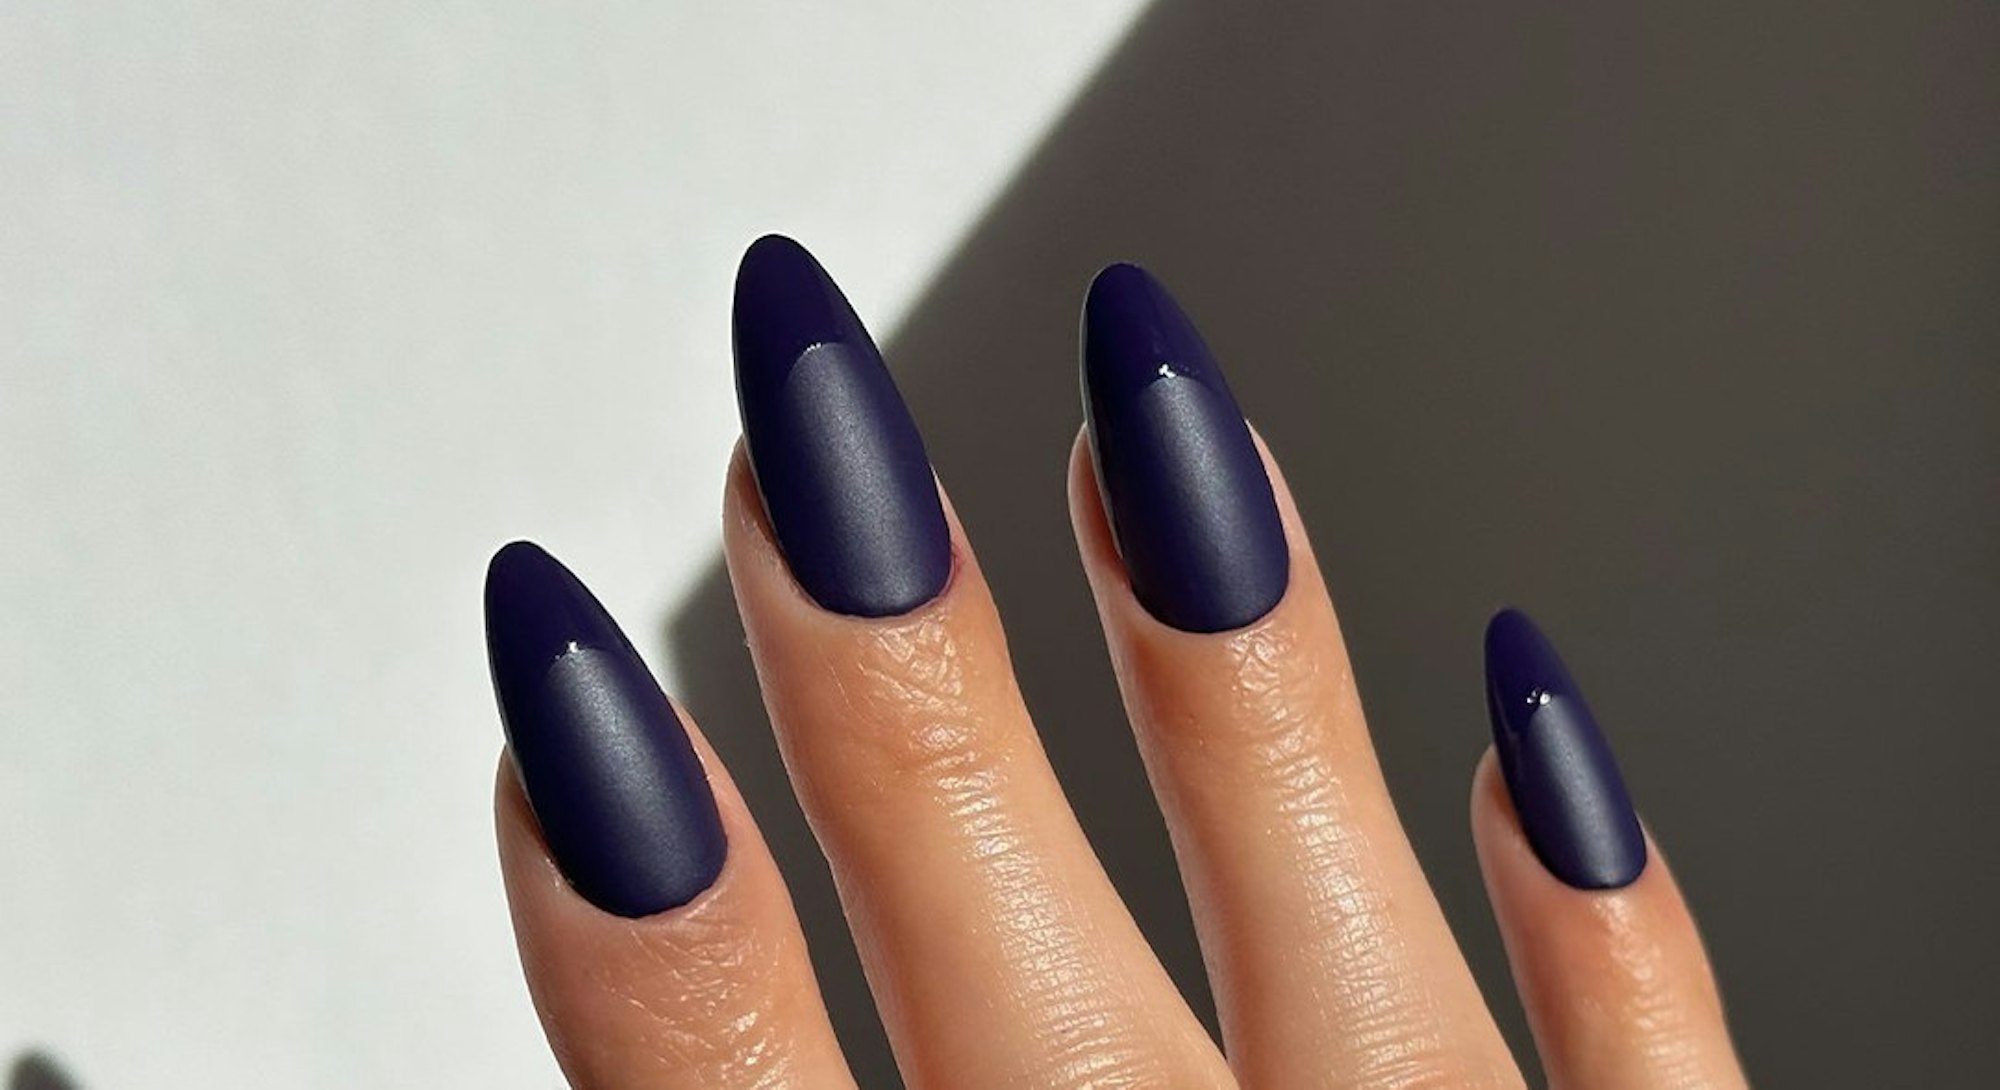 Try matte nail art with shiny French tips for Capricorn season.